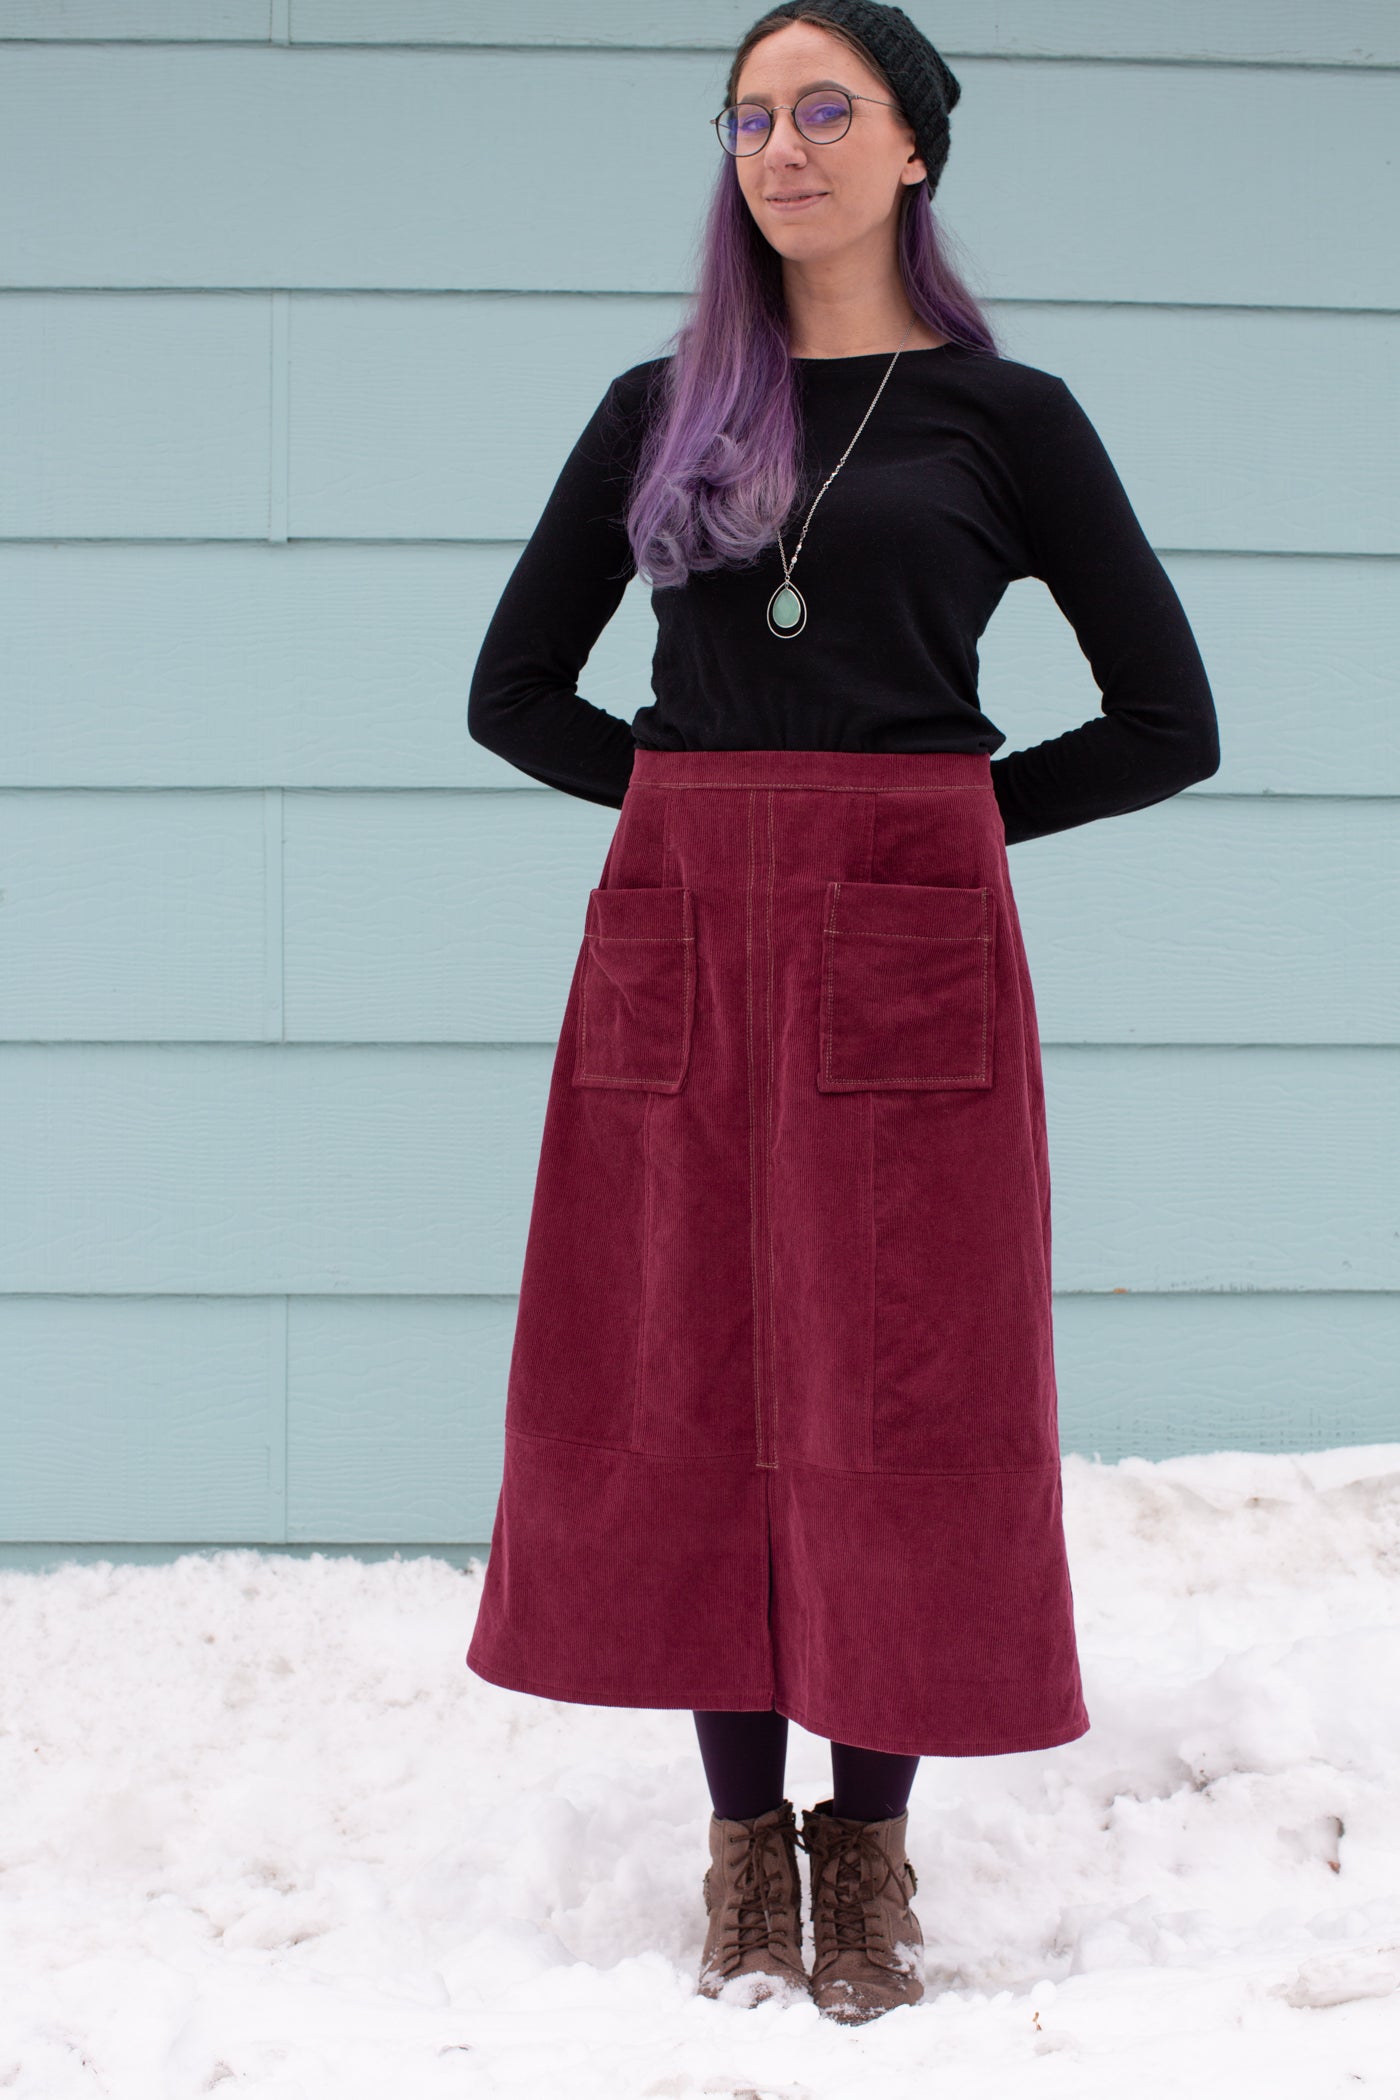 Aly standing in snow against a sea blue wall with her arms behind her back.  Aly is wearing a Robert Kaufman Corduroy skirt in merlot with a black long sleeve top.   